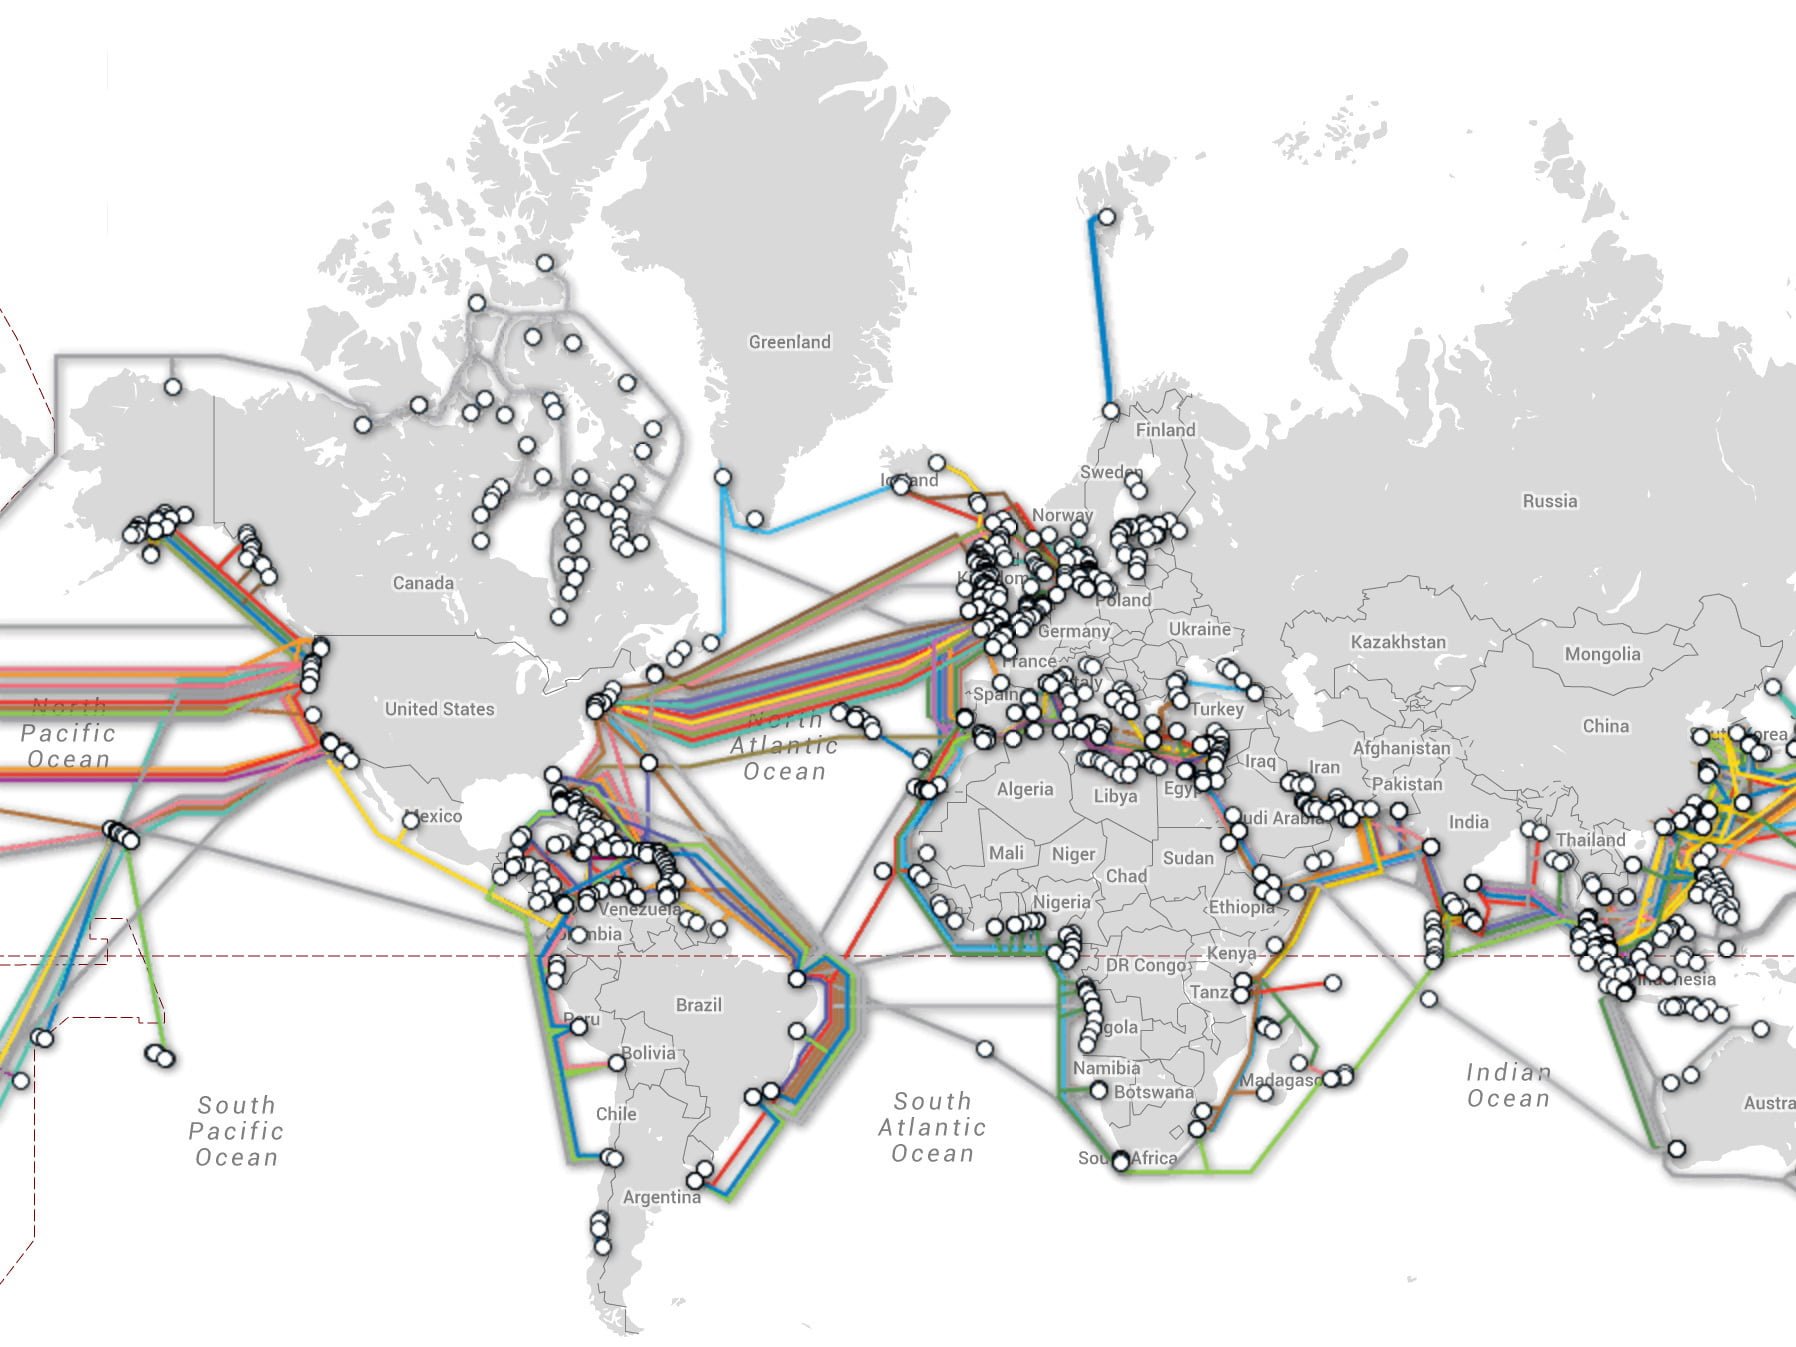 Map of submarine cable systems and their landing stations.